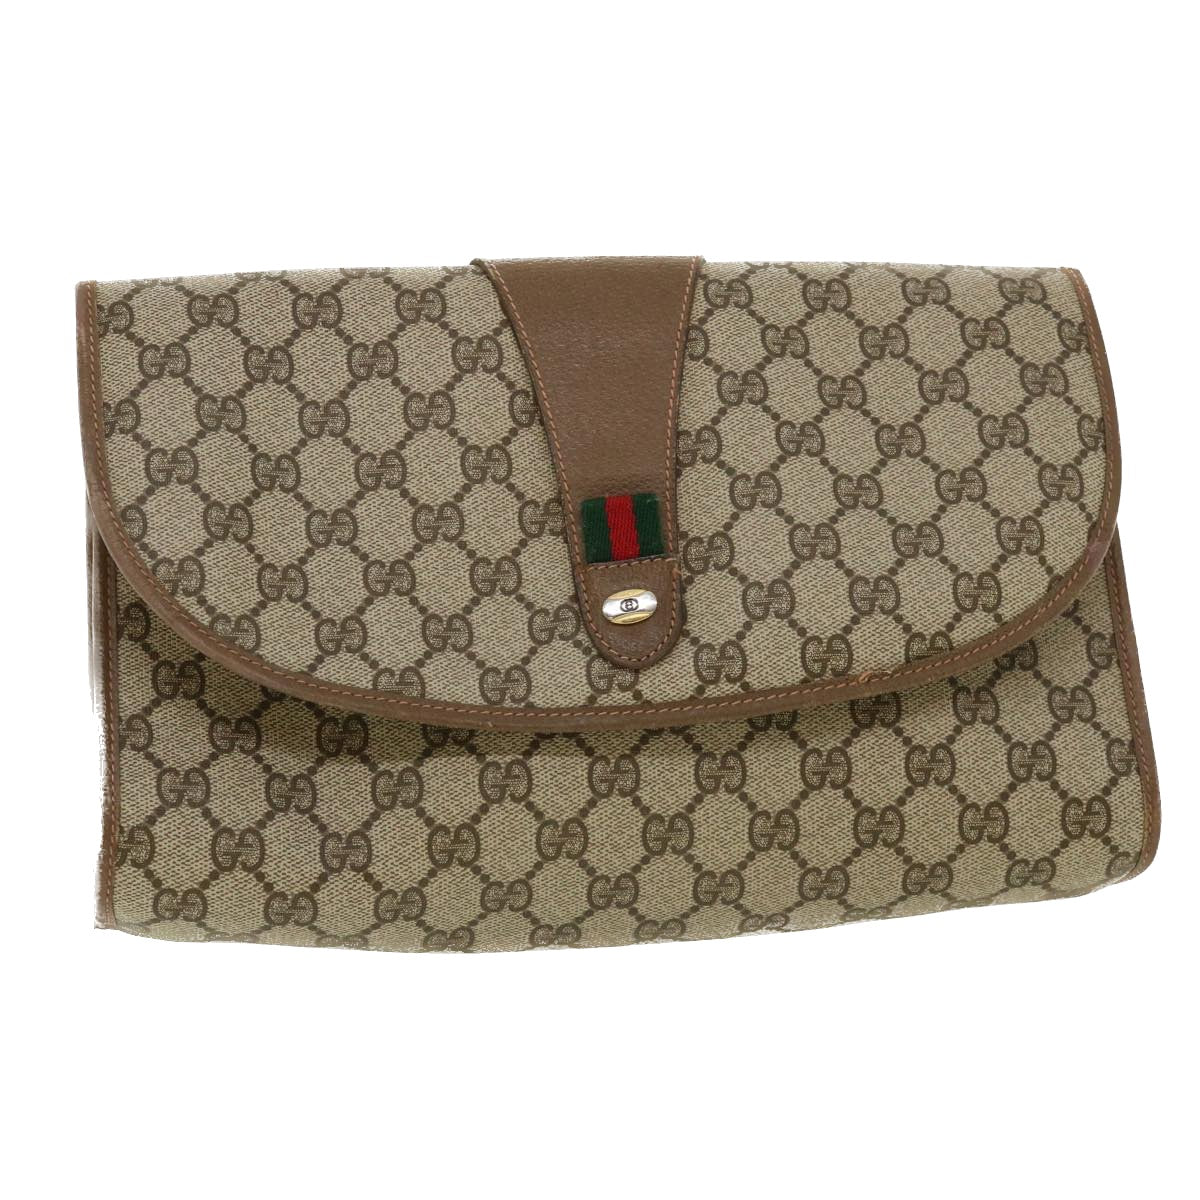 GUCCI GG Canvas Web Sherry Line Clutch Bag Beige Red Green 8901031 Auth ny173